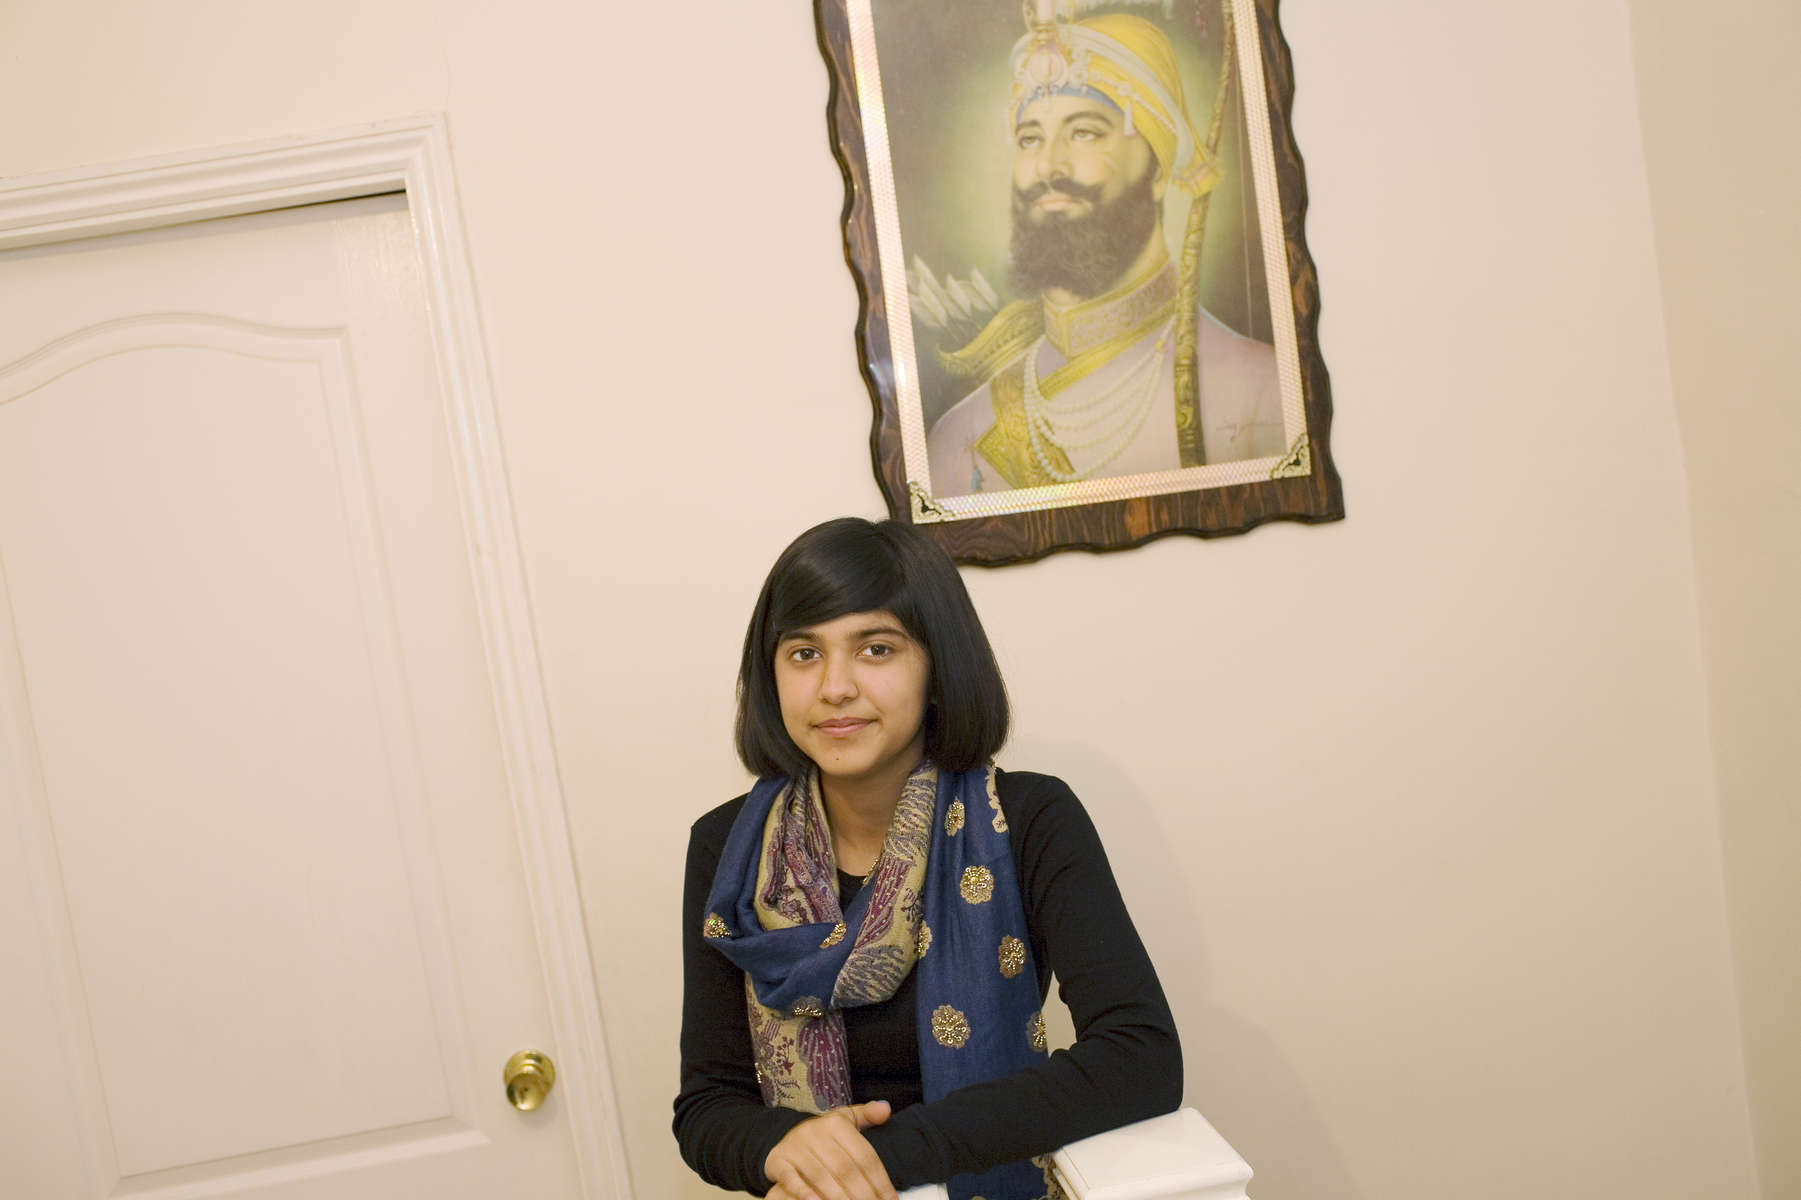 15 year old Robyn Kullar under a portrait of Sri Guru Gobind Singh at her home in Southall where she lives with her mother Sarbjeet (40), grandmother Kuldeep (59) and sister Alisha (13). Her family are Sikh but Robyn admits to being an Atheist. She enjoys the cultural aspects of Sikhism and will celebrate various festivals including Diwali.  Robyn is a pupil at Villiers High School.Villiers High School is in the town of Southall. It has a very wide ethnic diversity. 45 different 1st spoken languages are listed among the 1208 pupils. 25 ethnic groups are represented with Indian, Pakistani and Black-Somali the three highest.Southall is a suburban district of West London, England. The town has one of the largest concentrations of South Asian people outside of the Indian sub-continent. Over 55% os Southall's population of 70,000 is Indian/Pakistani, with less than 10% being White British.